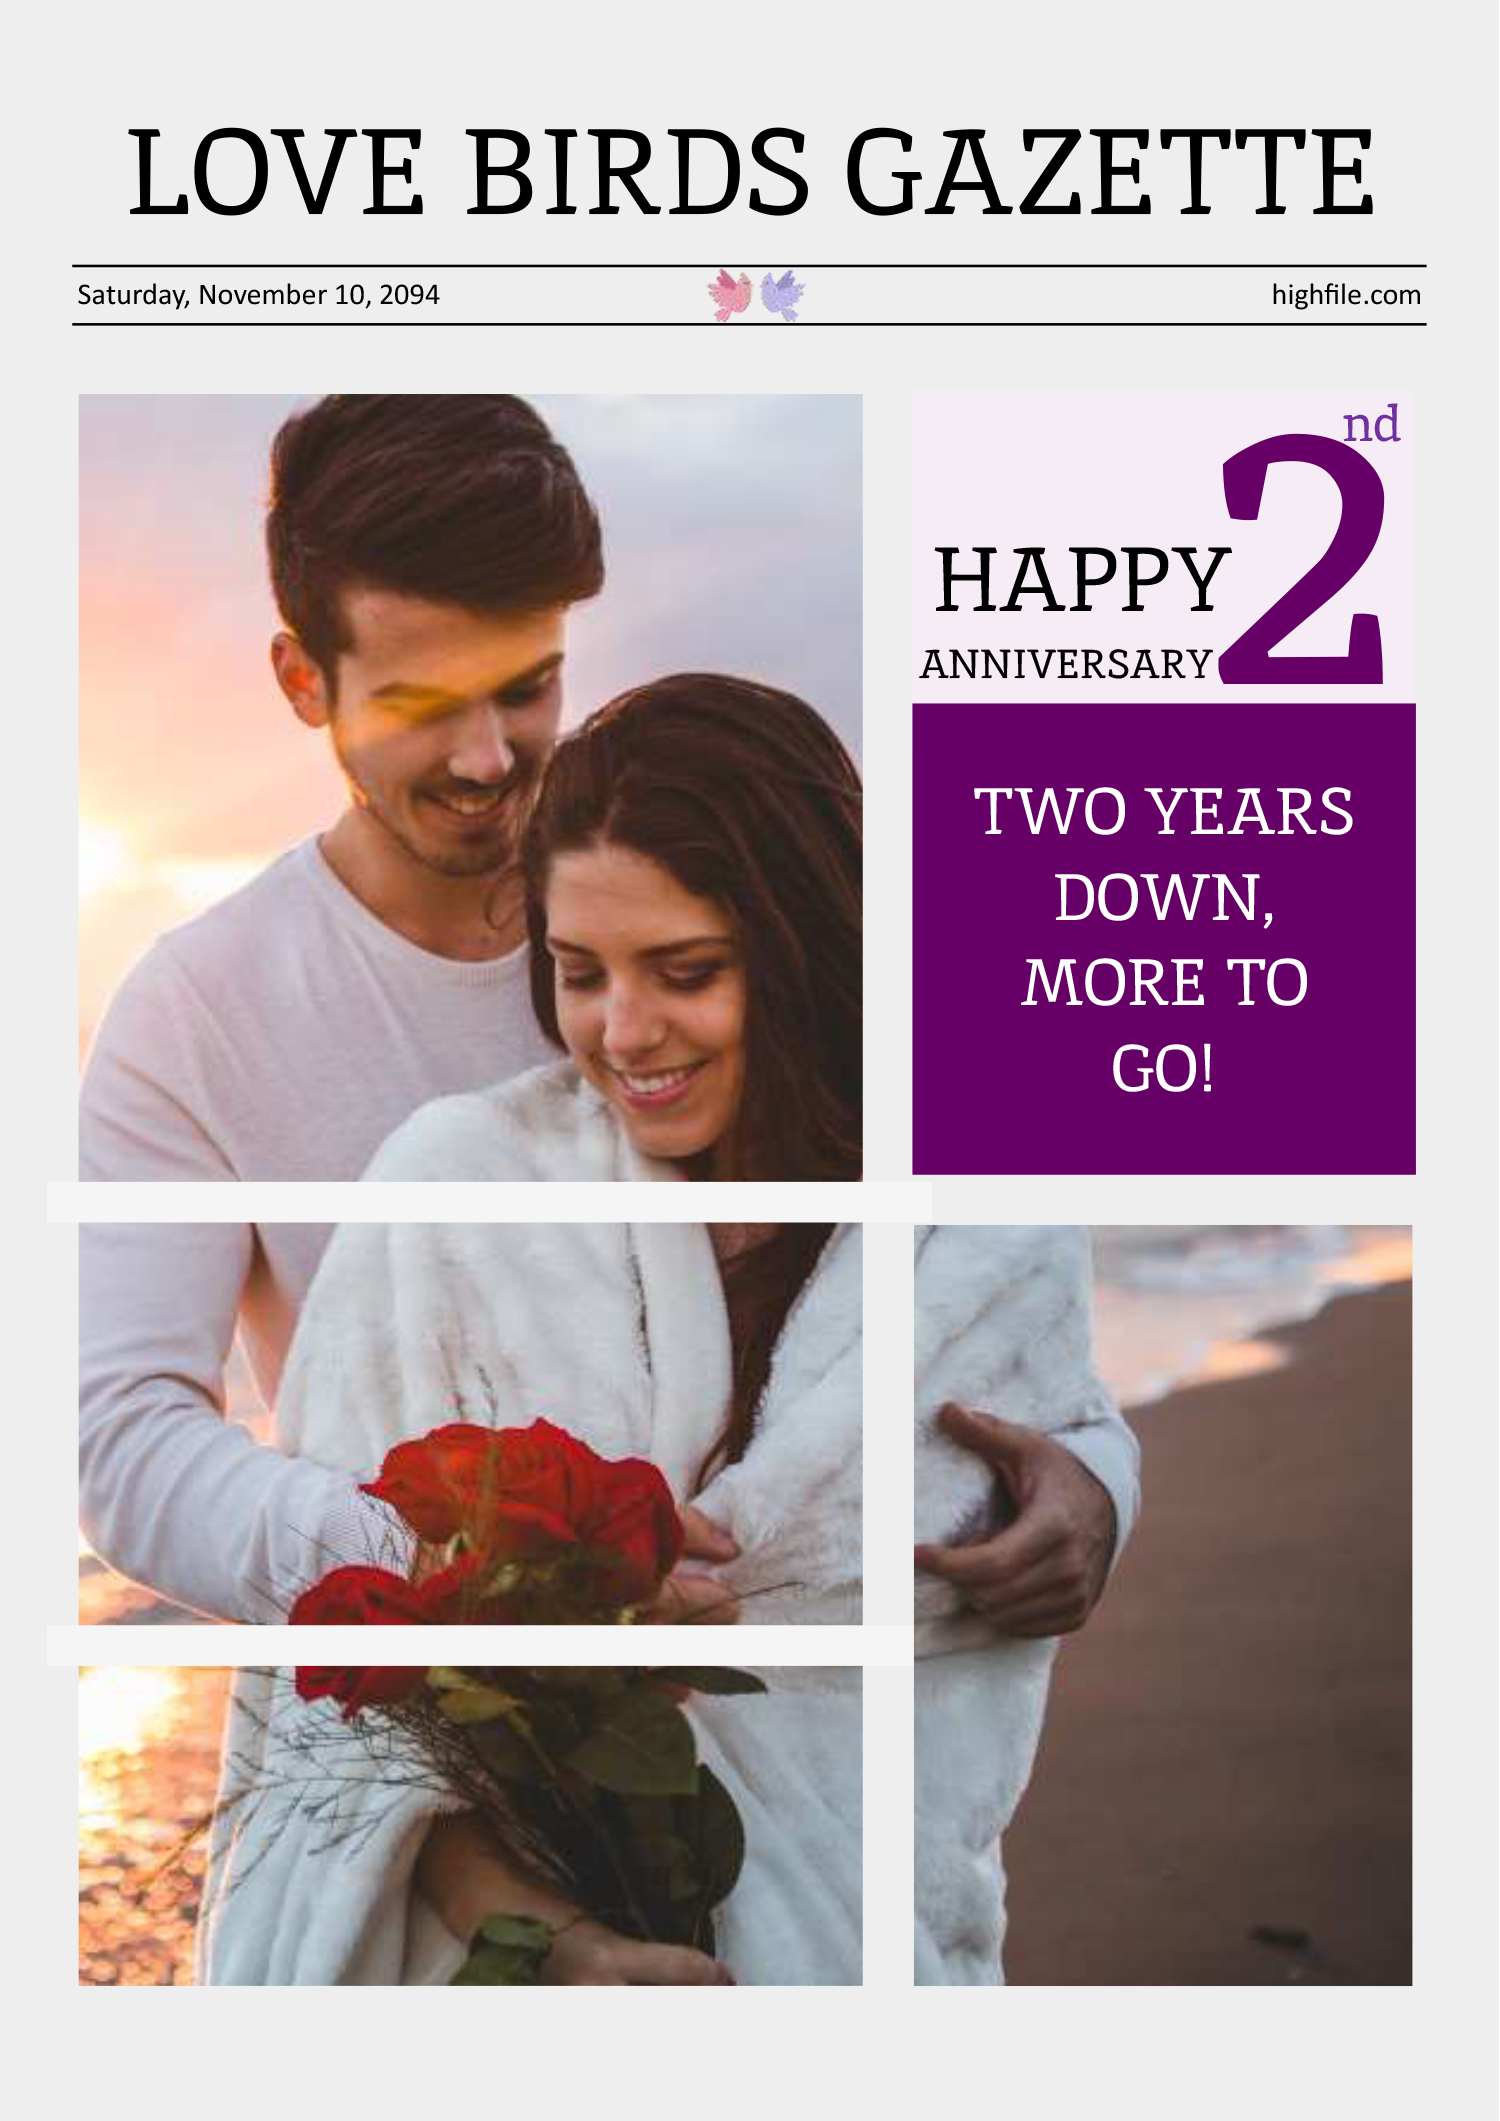 One year Wedding Anniversary Newspaper Template - Front Page